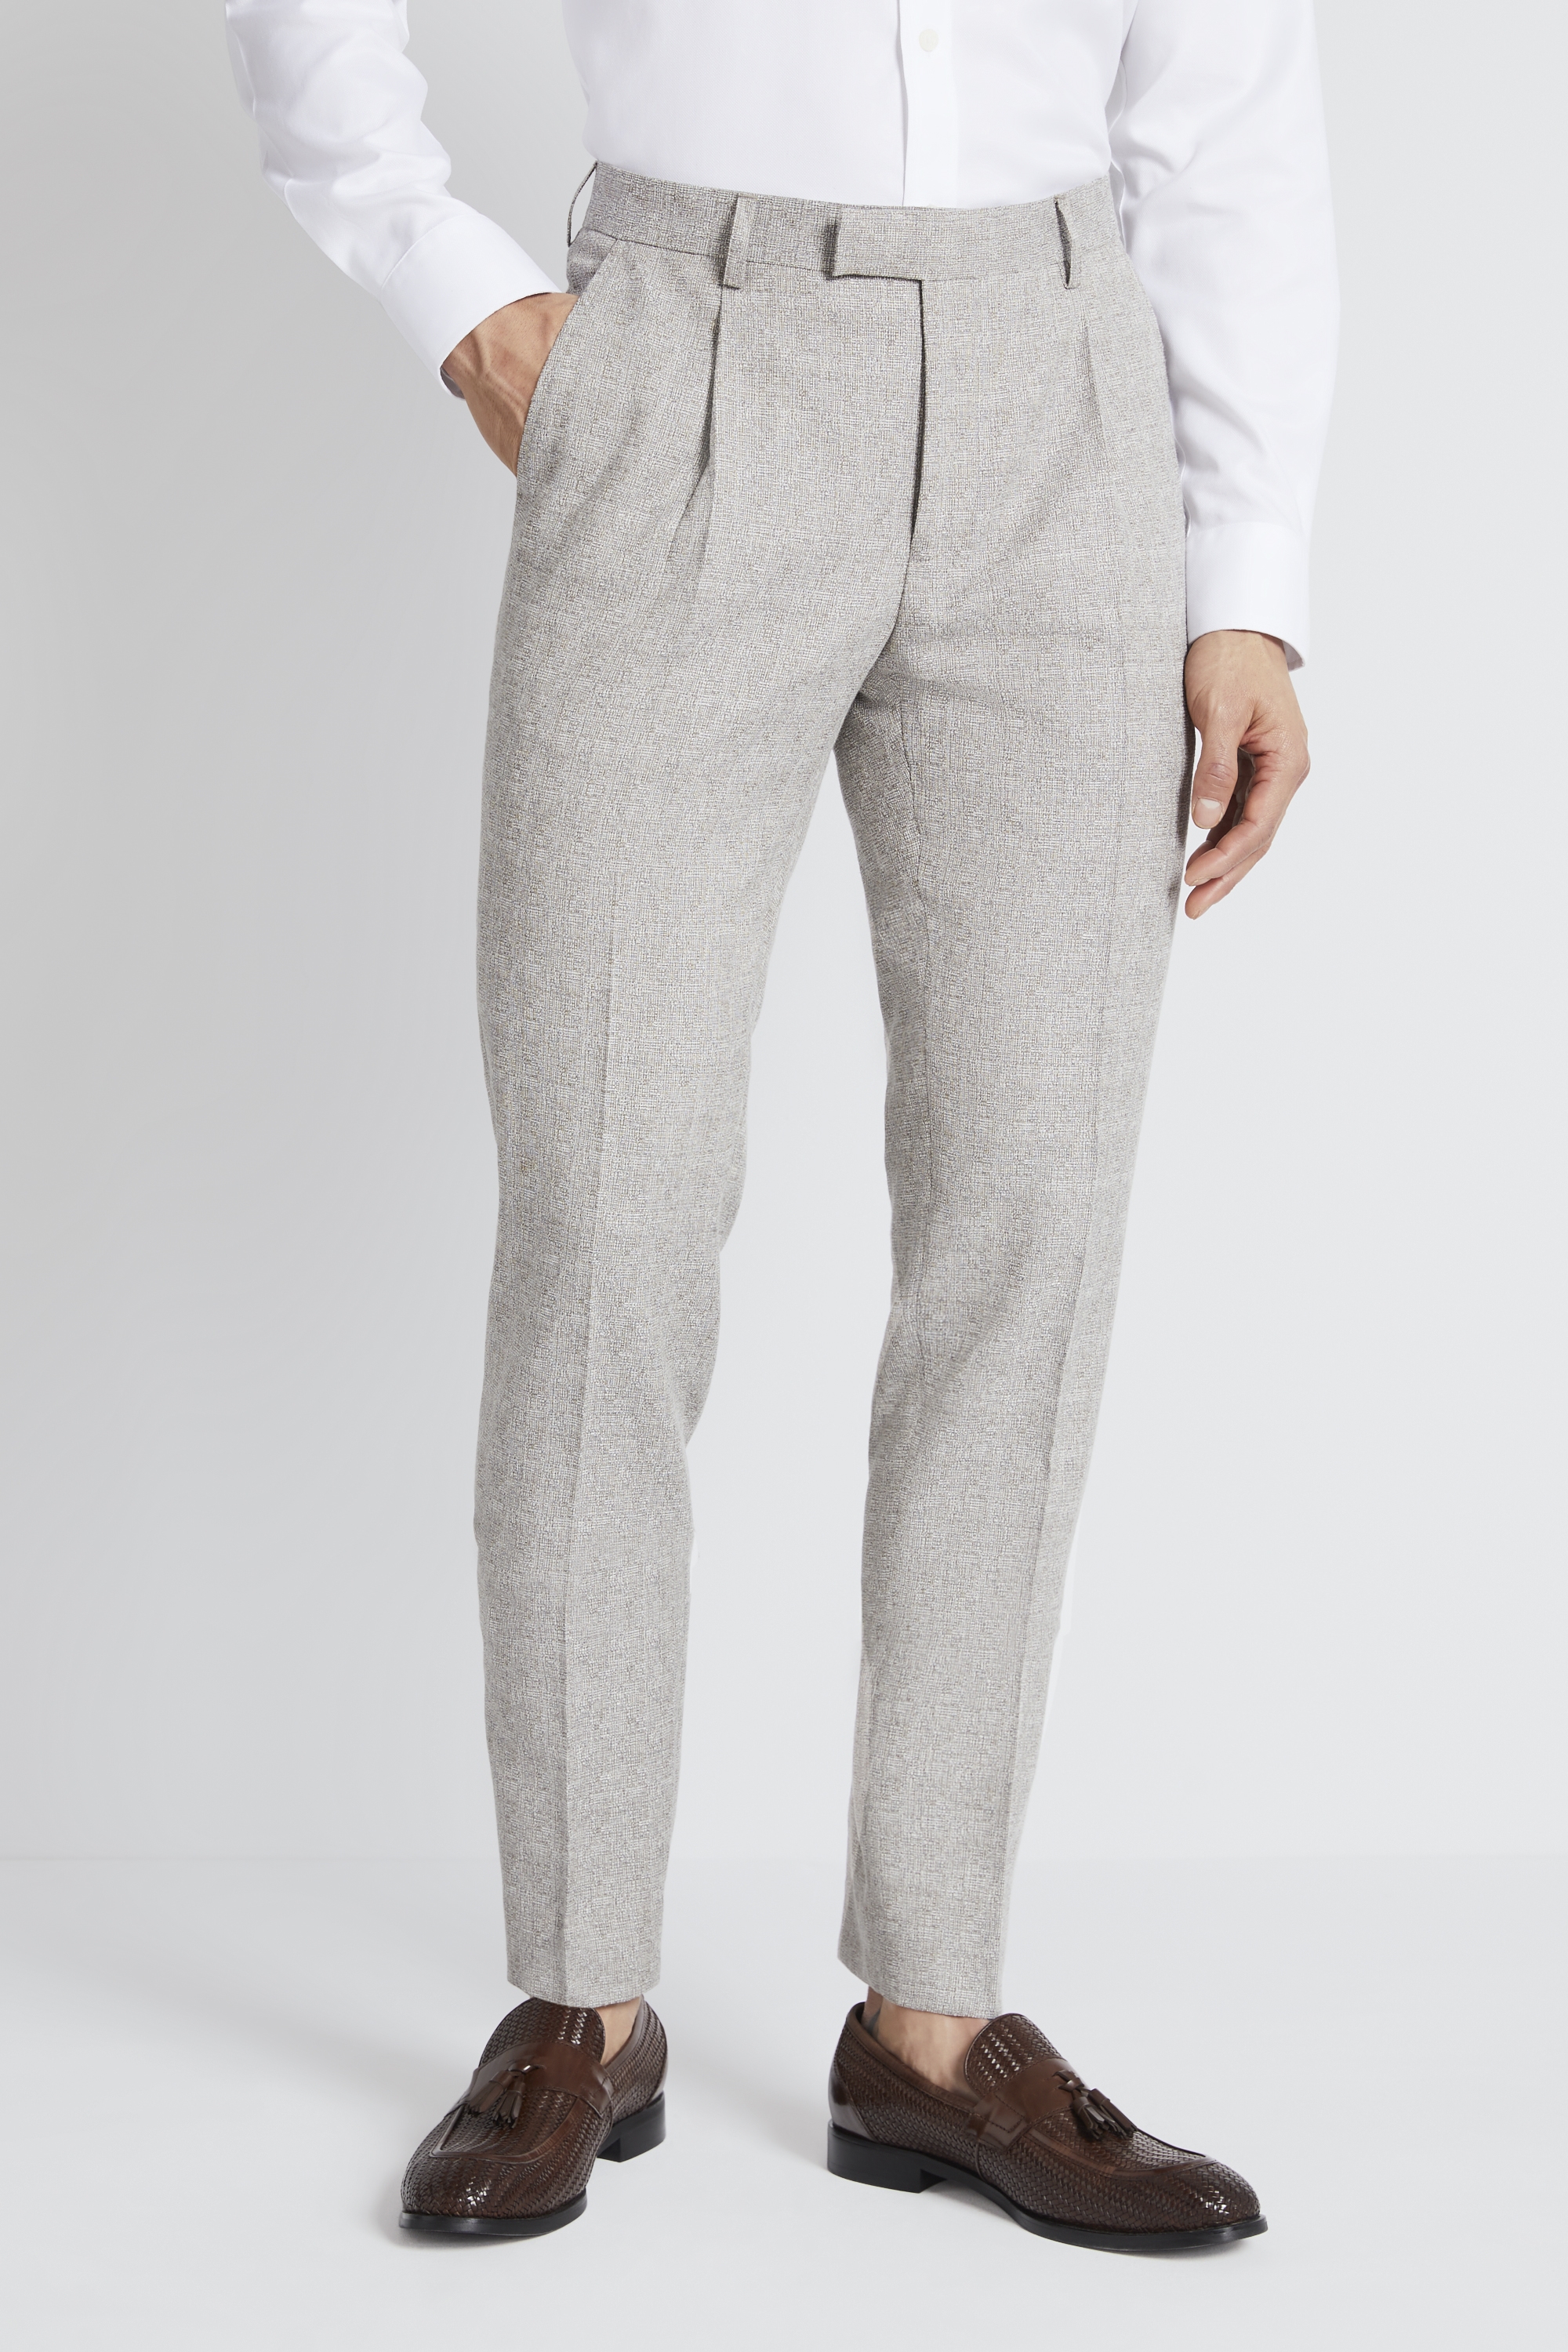 Slim Fit Neutral Texture Trouser | Buy Online at Moss